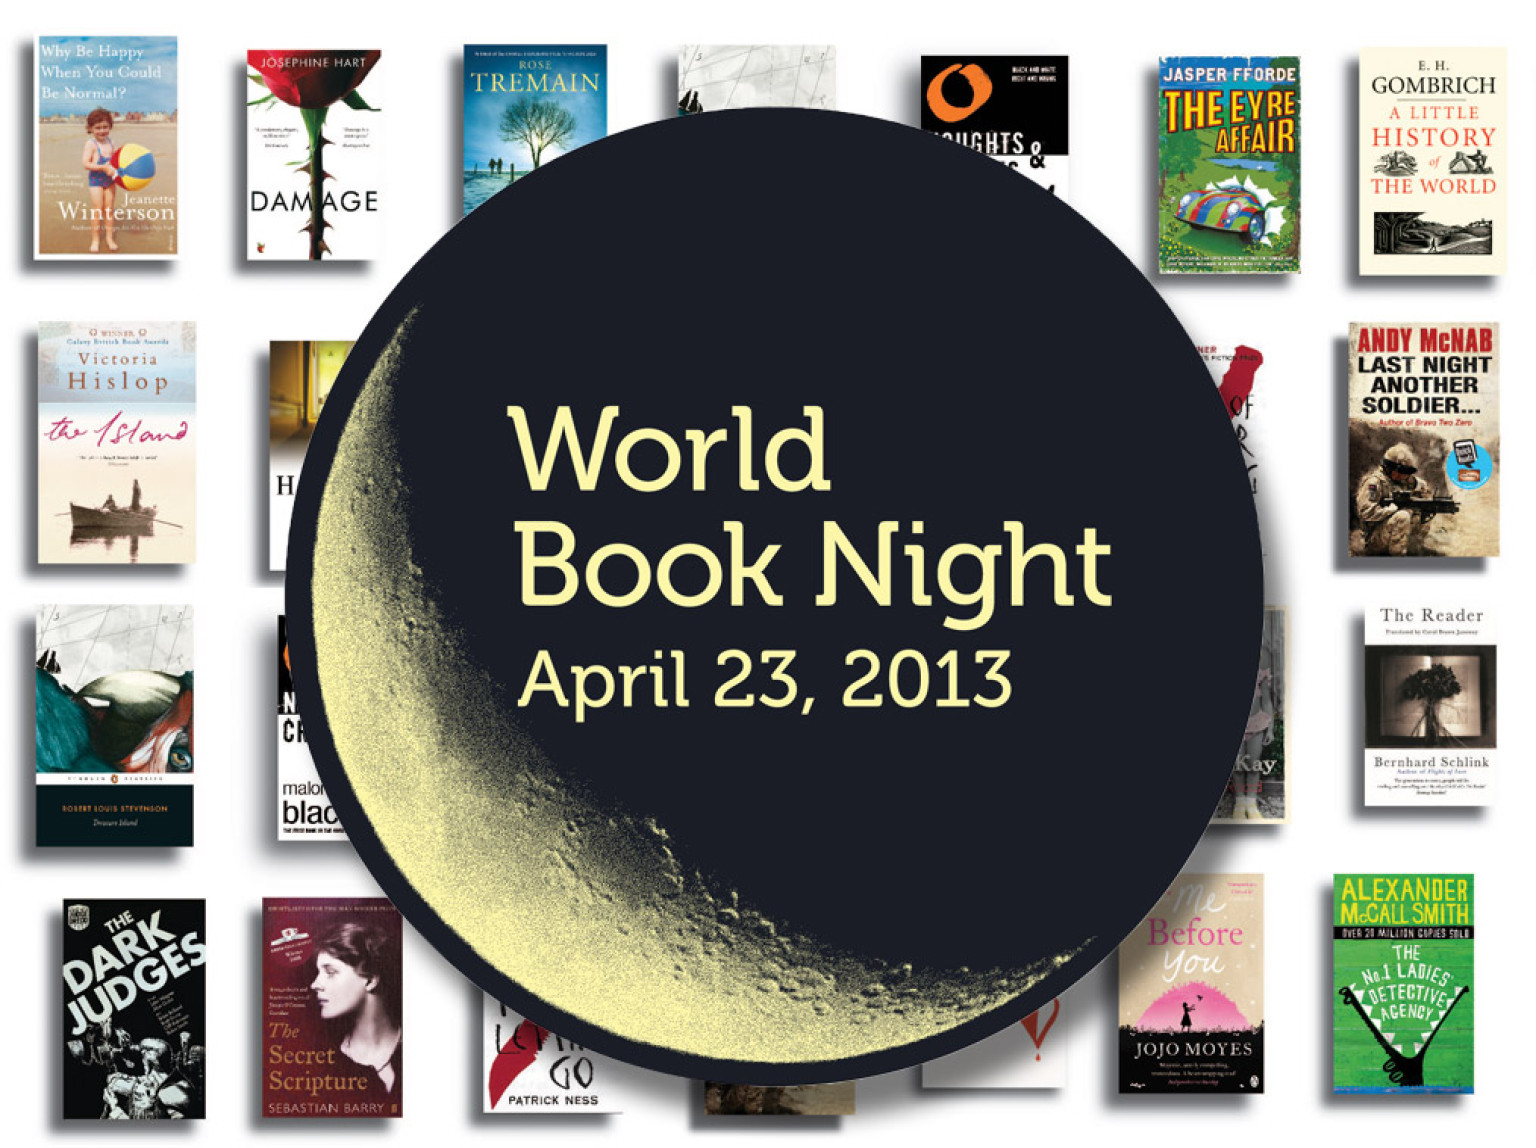 World Book Night: Half A Million Books To Be Handed Out | HuffPost UK